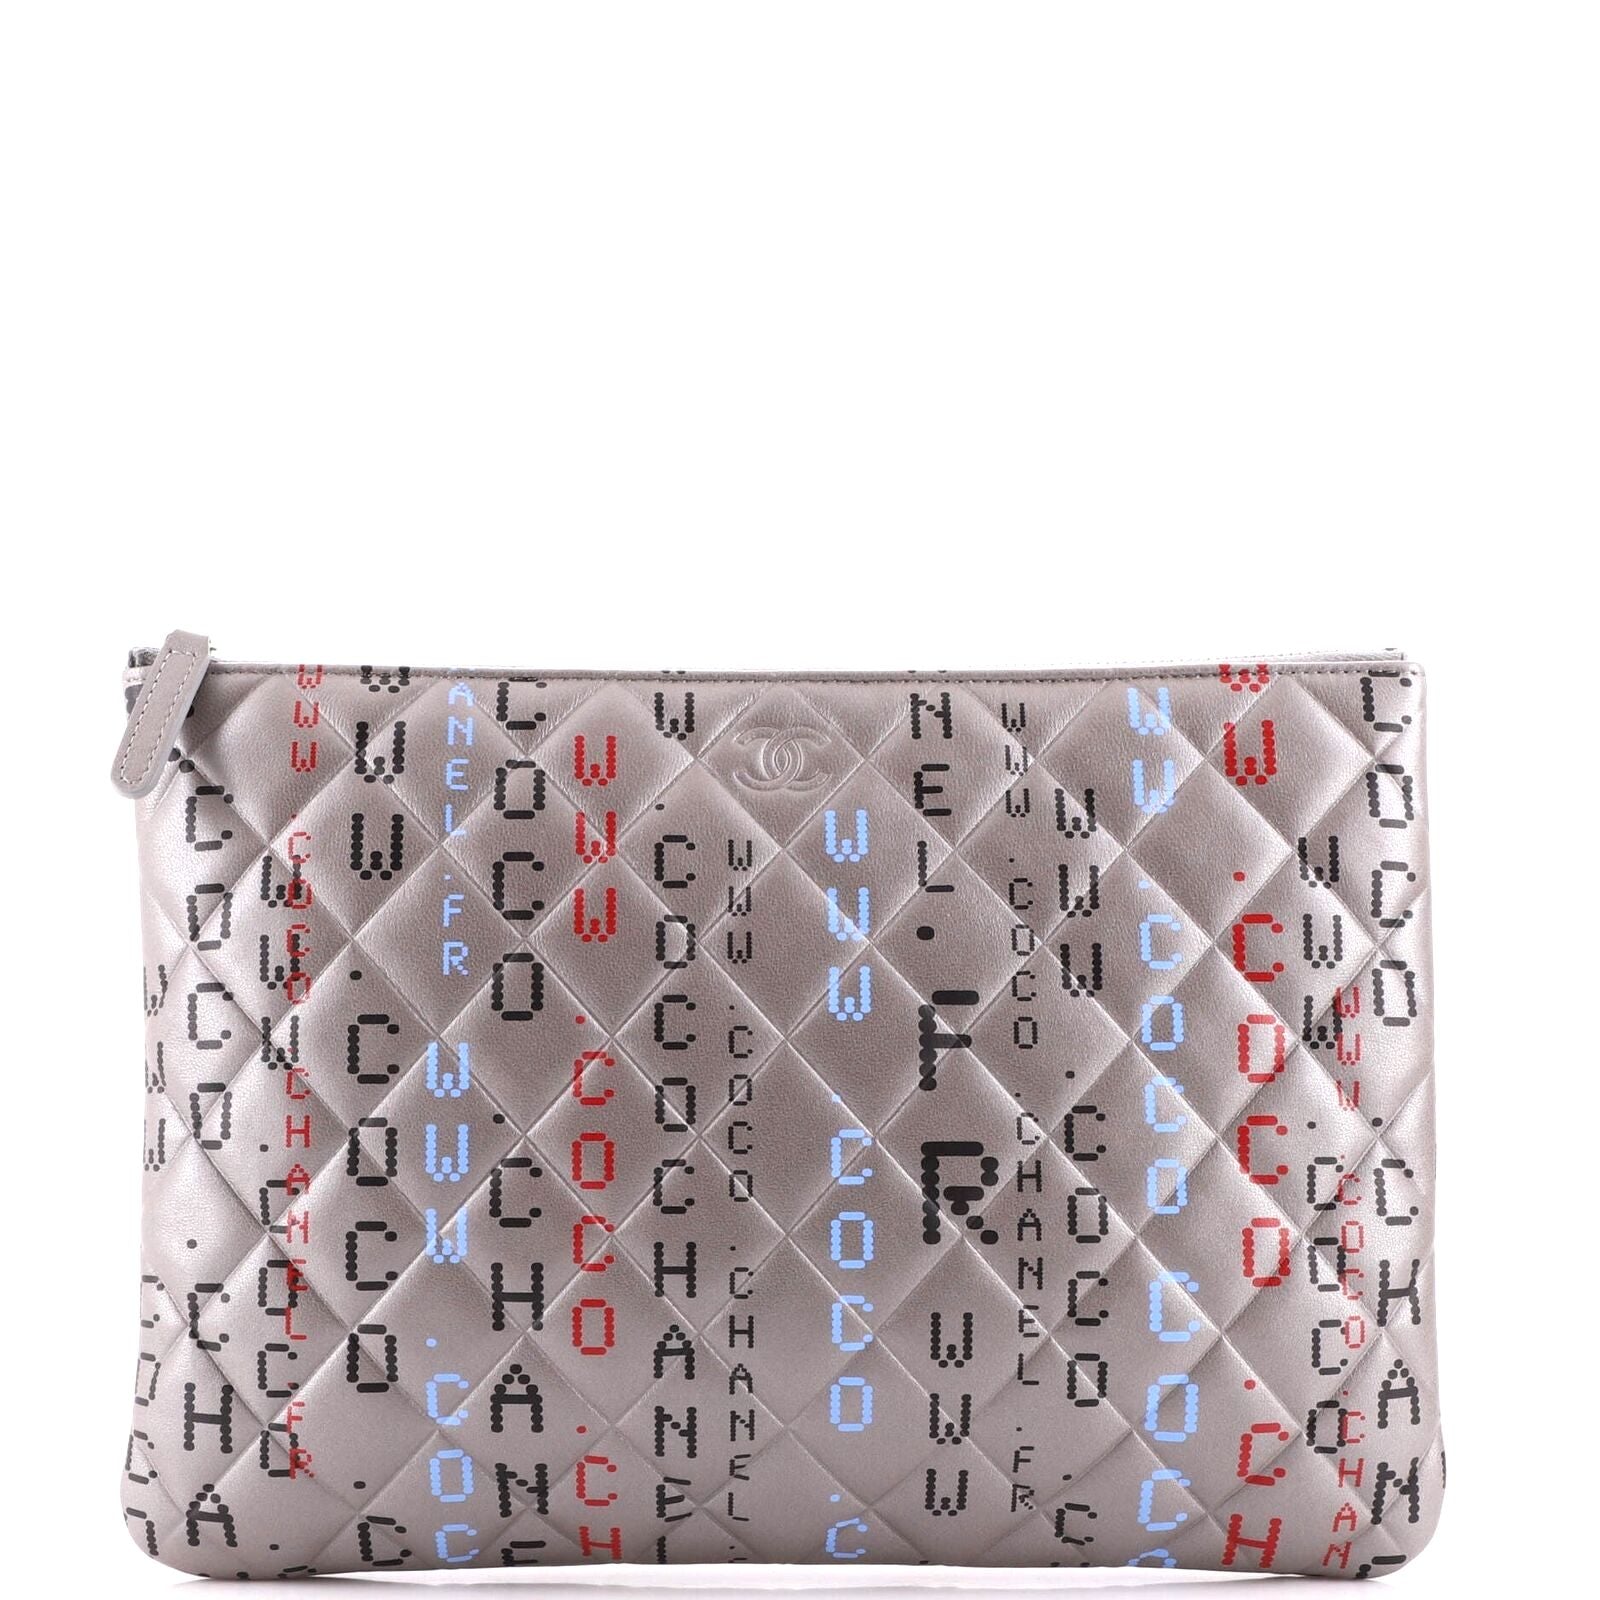 CHANEL METALLIC SILVER QUILTED LAMBSKIN PRINTED DATA CENTER O CLUTCH